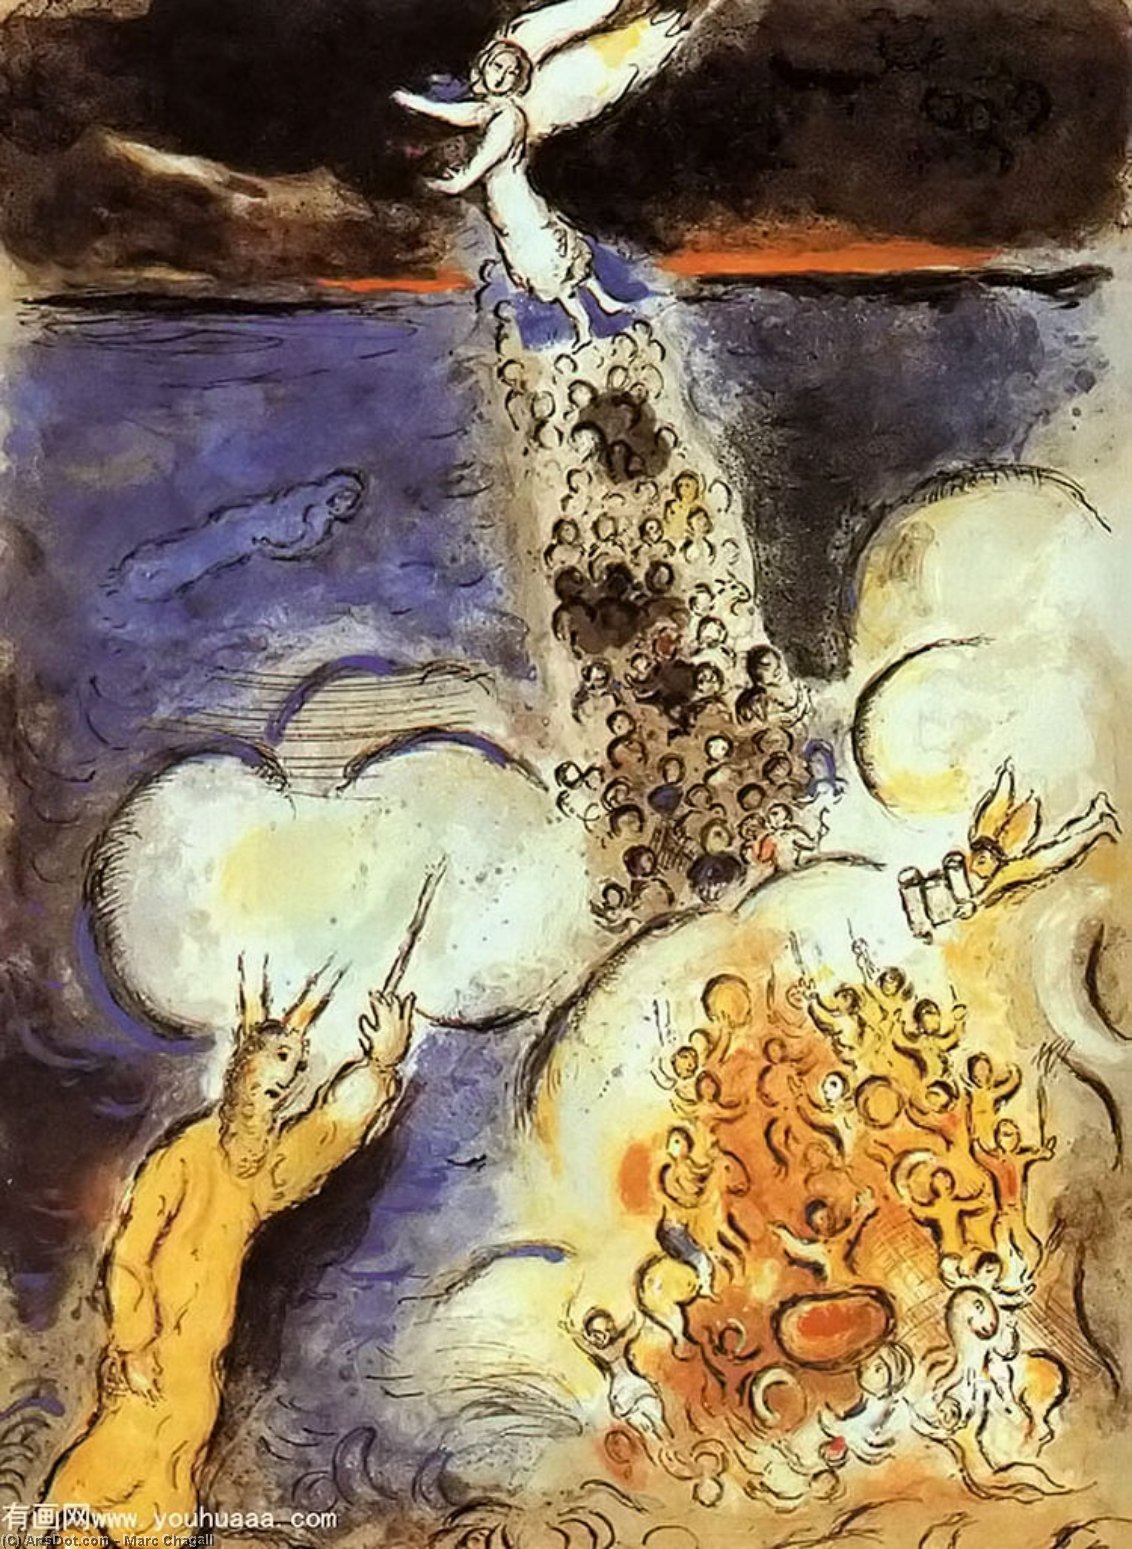 WikiOO.org - 백과 사전 - 회화, 삽화 Marc Chagall - Moses calls the waters down upon the Egyptian army